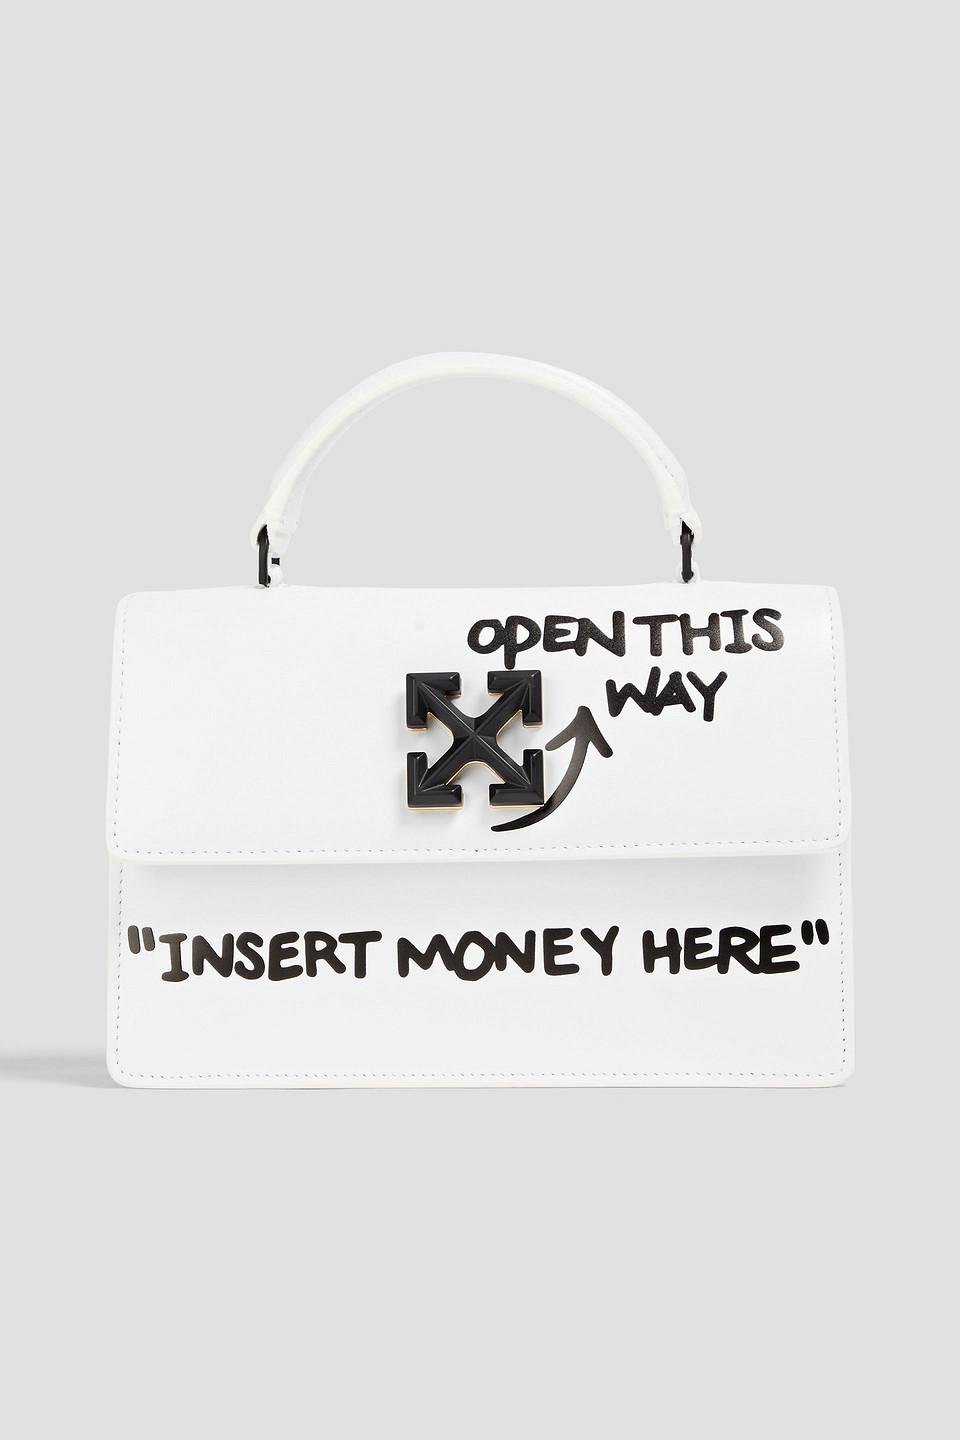 Off-White c/o Virgil Abloh Jitney 1.4 Printed Leather Tote in